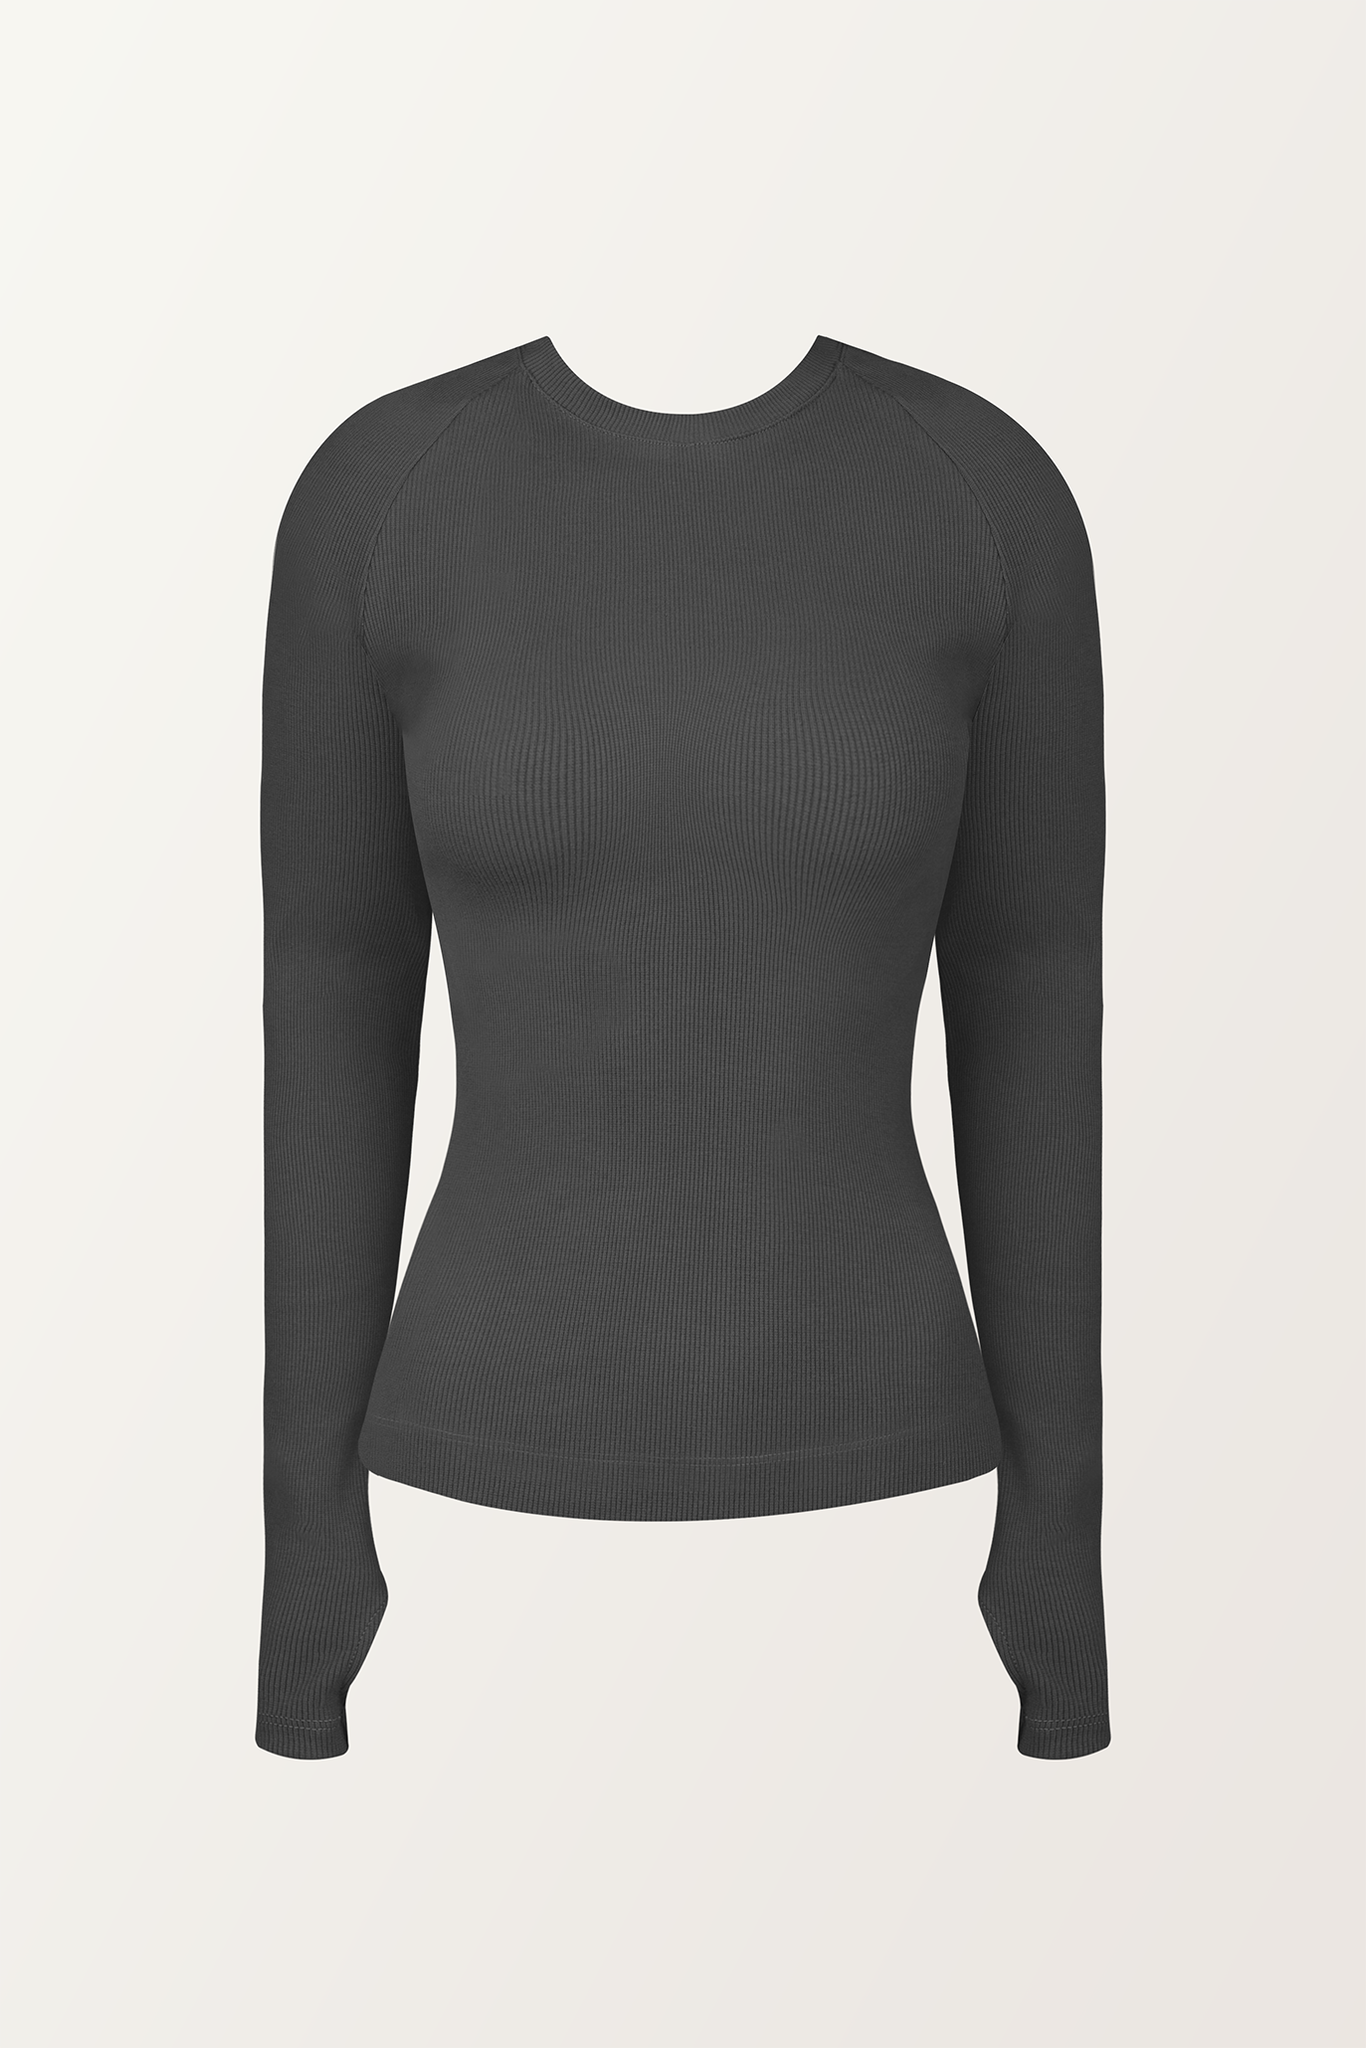 PIXIE WON'T PLAY TRINITY LONG - SLEEVE TOP RIBBED CARBON GREY ORGANIC COTTON SUSTAINABLE FASHION WEAR WITHOUT BRA LUXURY STYLISH COMFORTABLE BREATHABLE FABRIC VERSATILE RELAXED FIT SOFT TRENDY SUMMER AUTUMN WINTER SPRING WEAR CASUAL OUTFIT WORKOUT LAYERING VARIOUS COLORS FASHIONABLE MUST-HAVE EVERYDAY ESSENTIALS